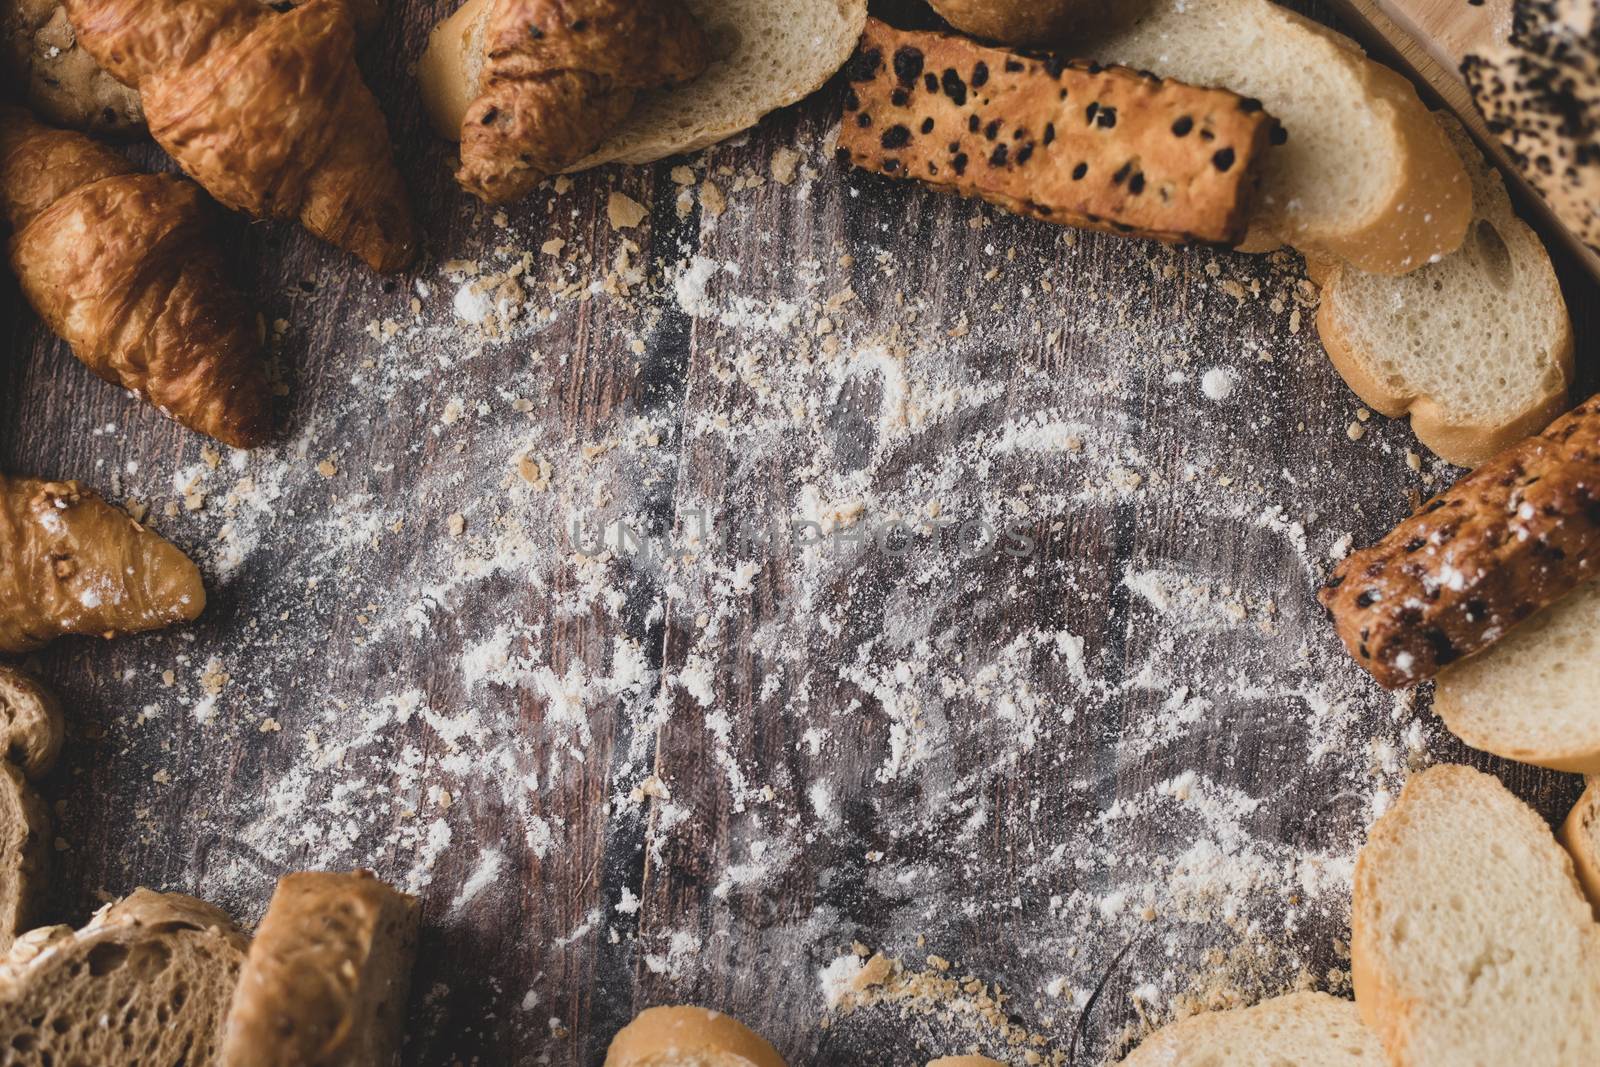 Bread and pastry powder on a wooden table by Nikkikii